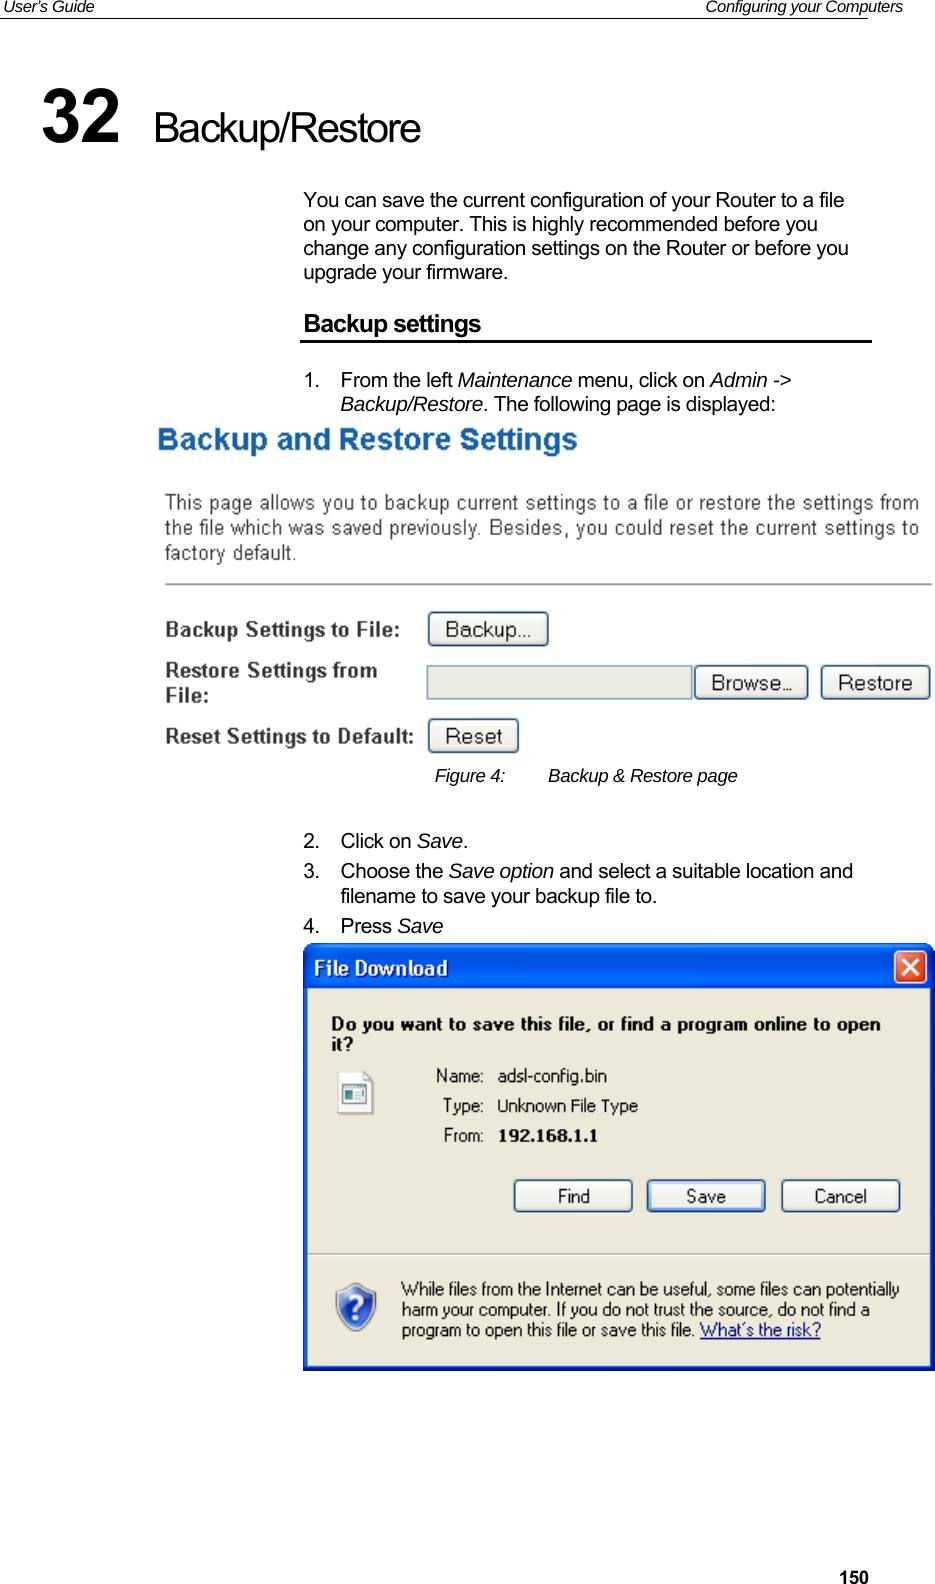 User’s Guide   Configuring your Computers  15032  Backup/Restore You can save the current configuration of your Router to a file on your computer. This is highly recommended before you change any configuration settings on the Router or before you upgrade your firmware. Backup settings 1.  From the left Maintenance menu, click on Admin -&gt; Backup/Restore. The following page is displayed:  Figure 4:  Backup &amp; Restore page  2.  Click on Save. 3.  Choose the Save option and select a suitable location and filename to save your backup file to. 4.  Press Save     